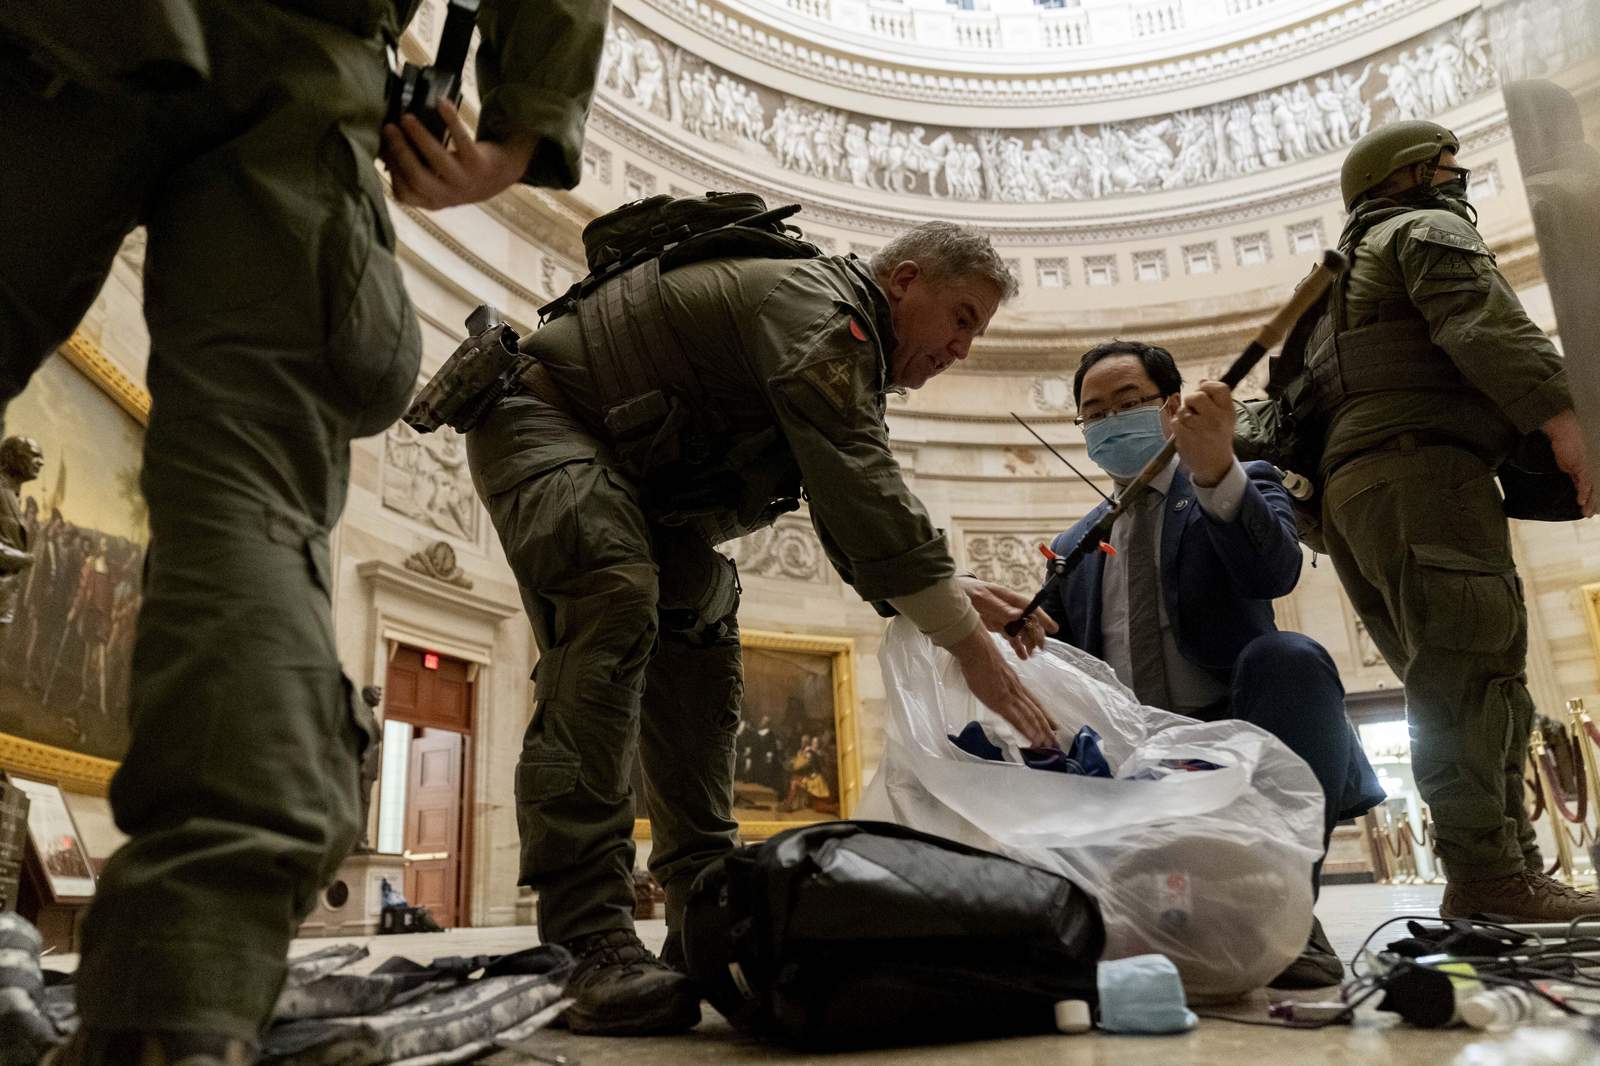 GALLERY: Rioters leave trail of damage throughout Capitol